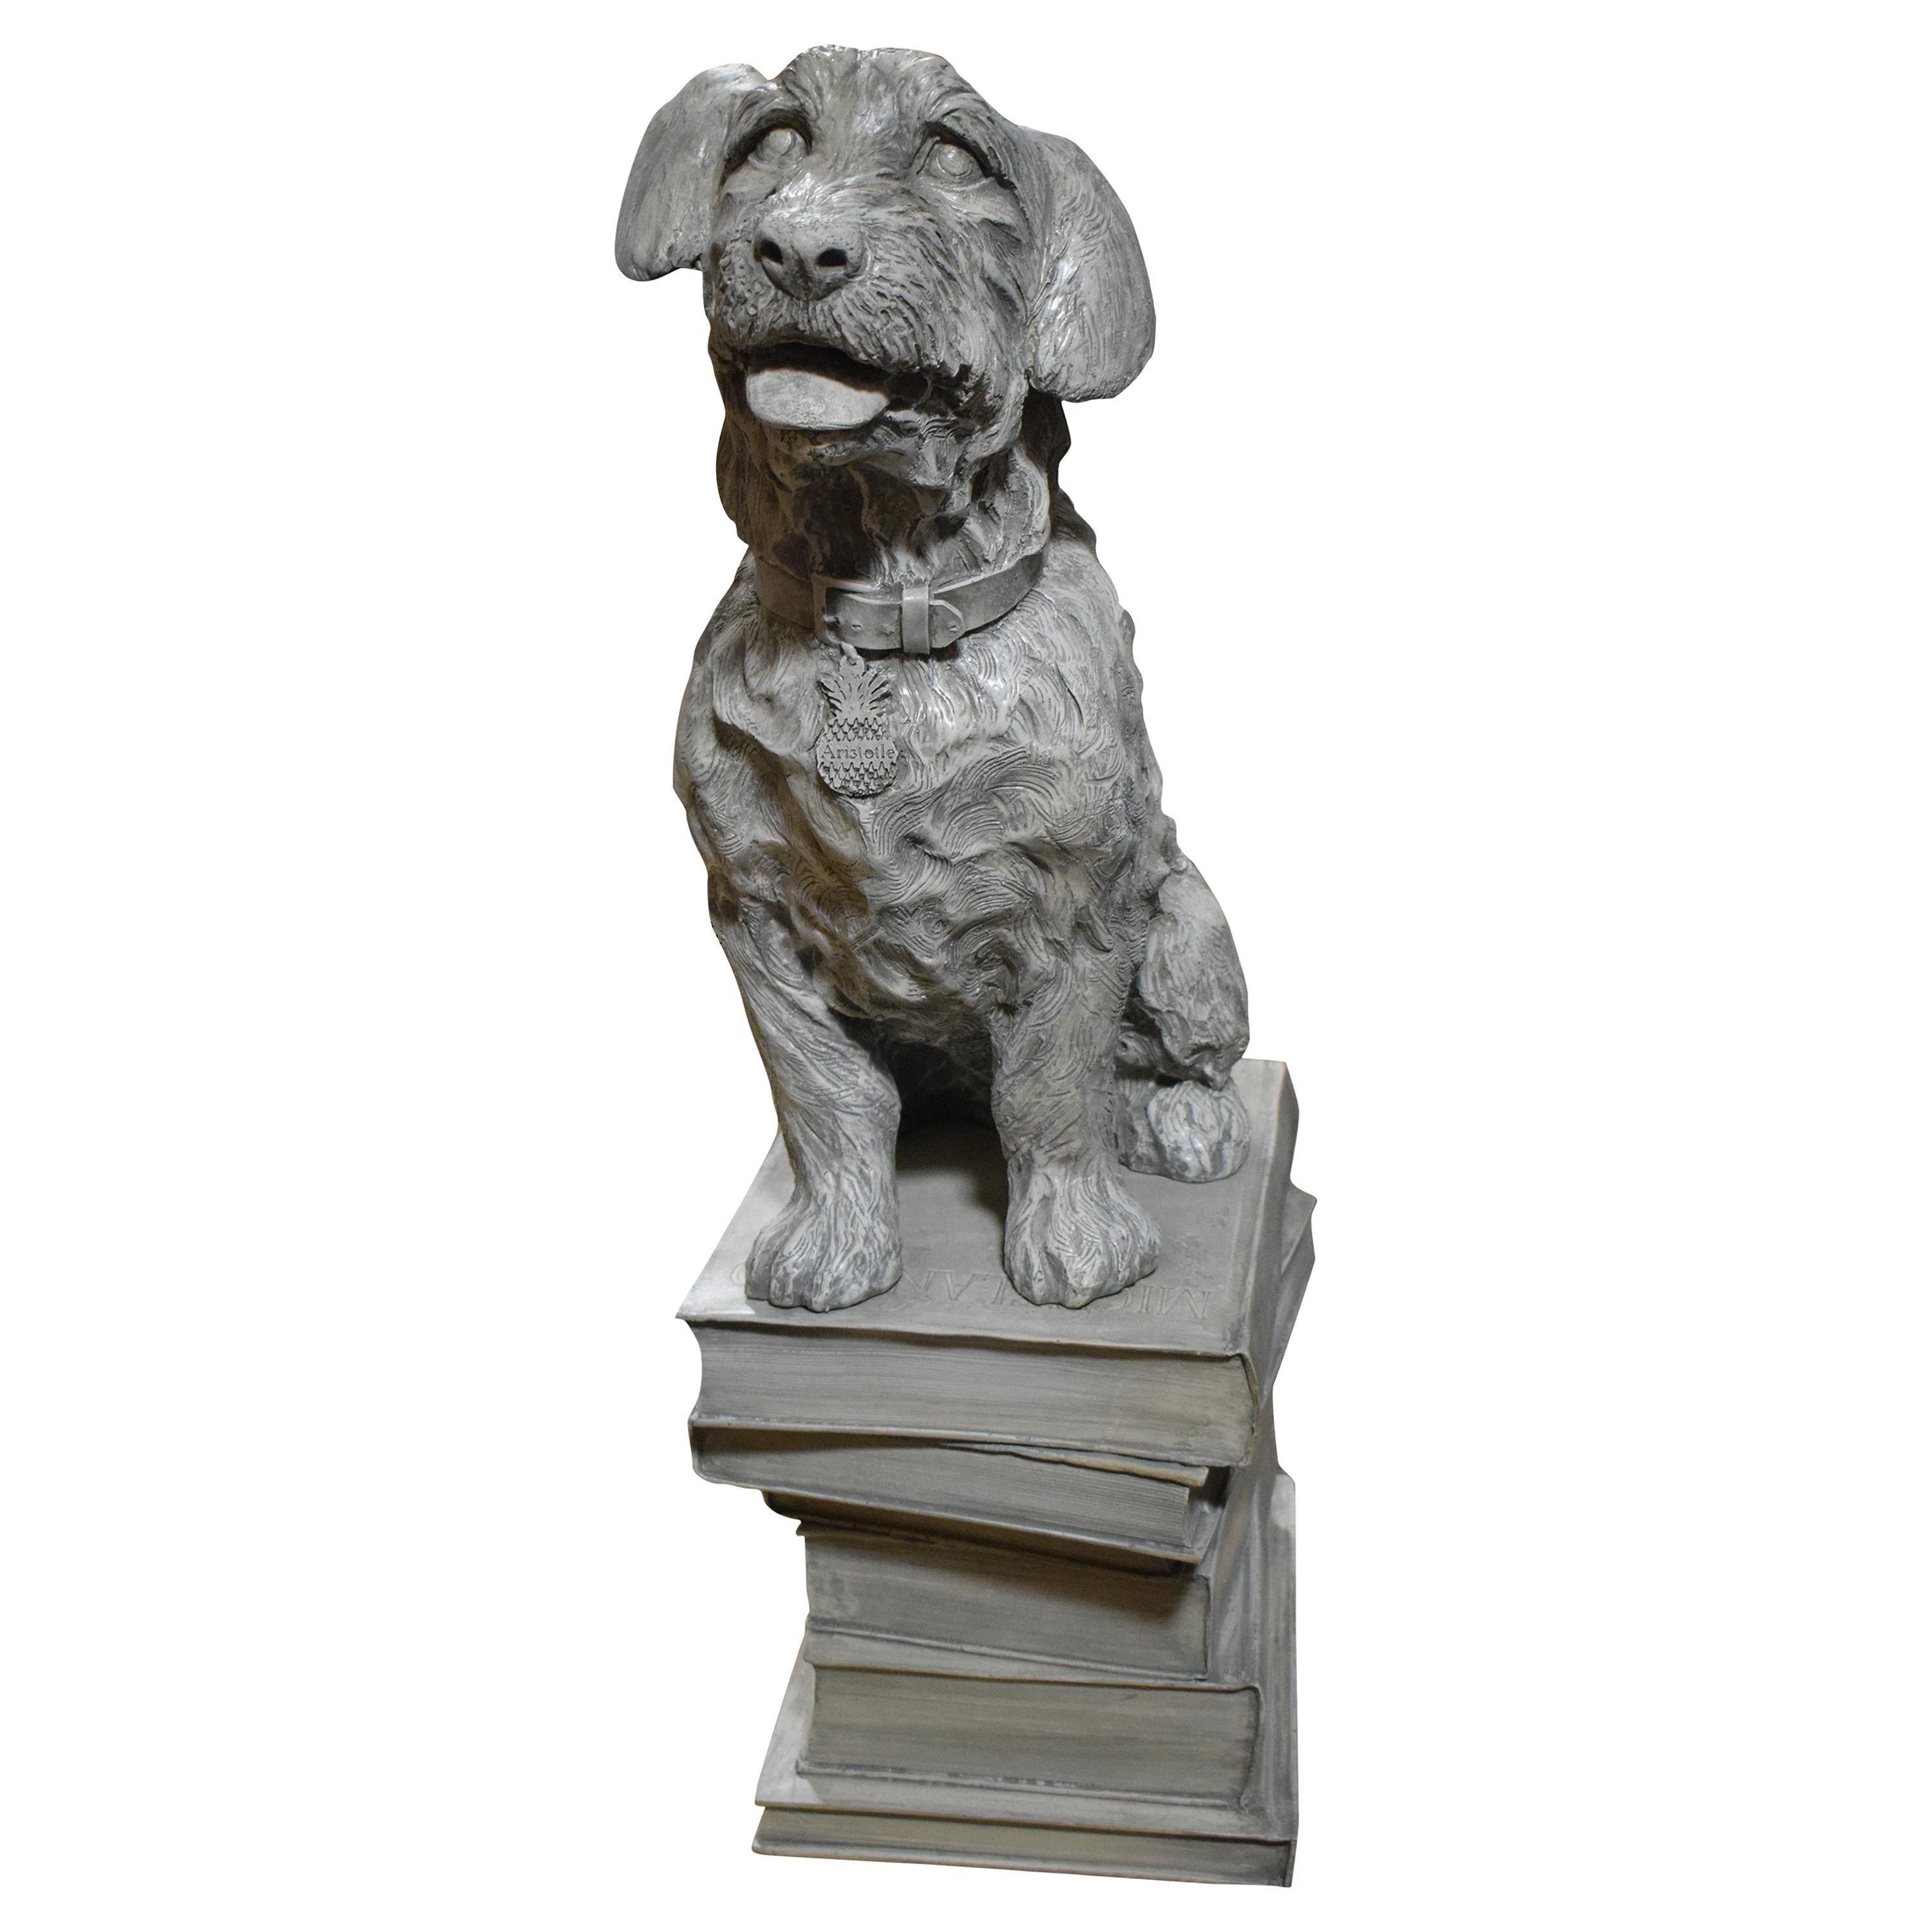 Highly Decorative Full Size Sculpture of a Dog Sitting on Books